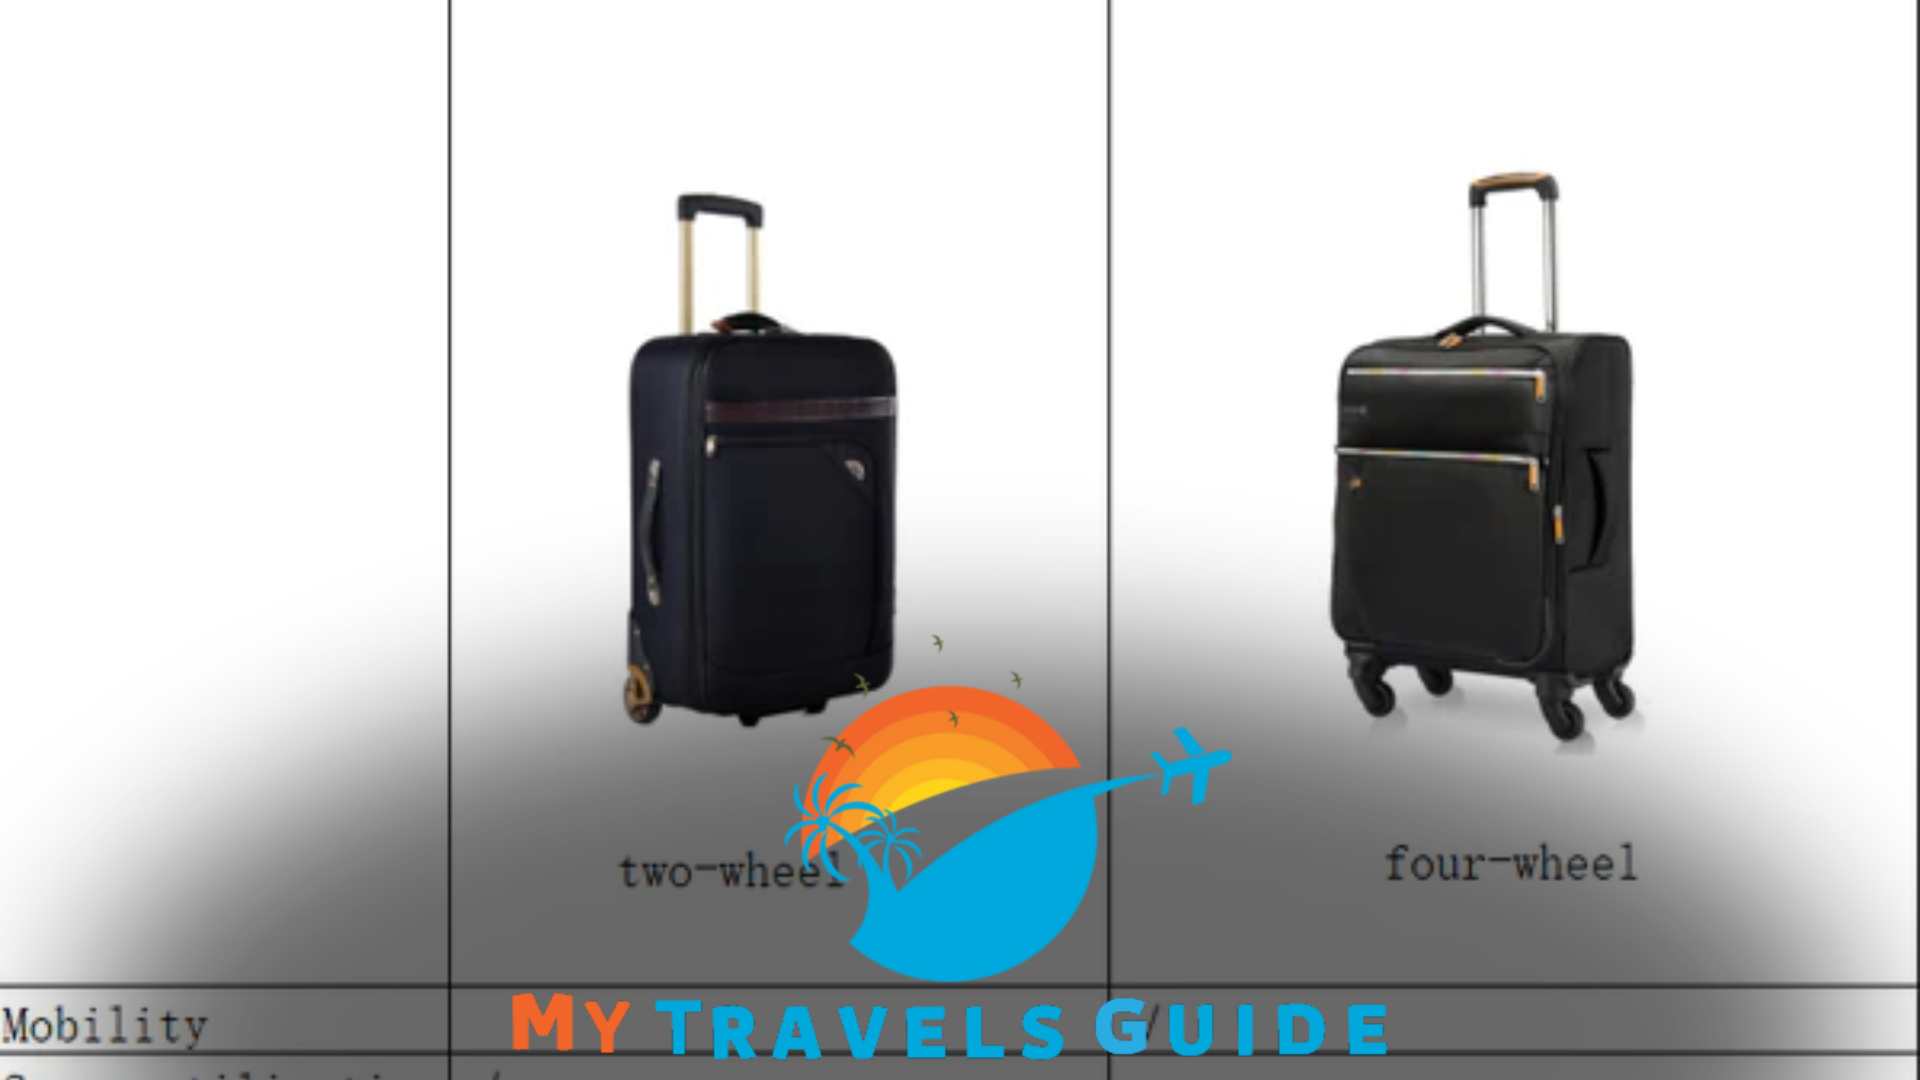 2-Wheel vs 4-Wheel Luggage: Which One Should You Choose?